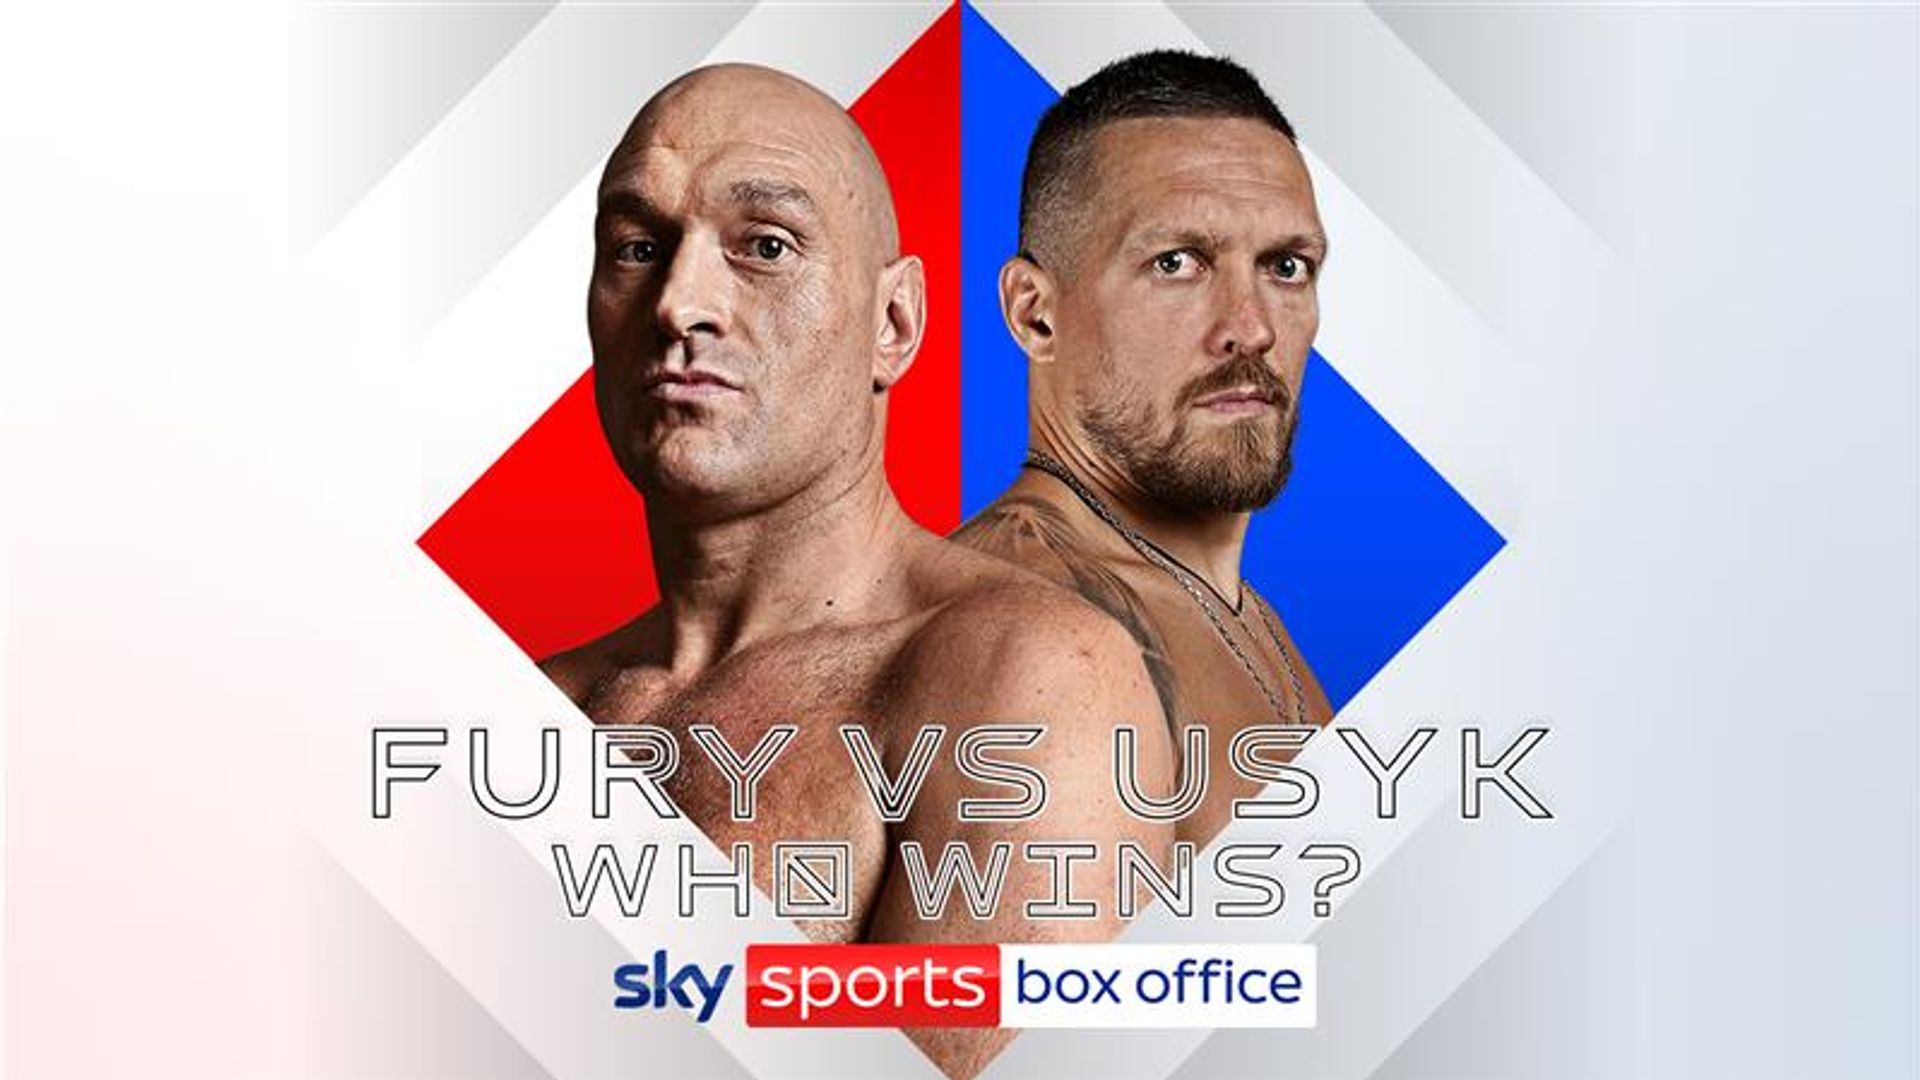 Fury vs Usyk expert predictions - who will be undisputed champ?